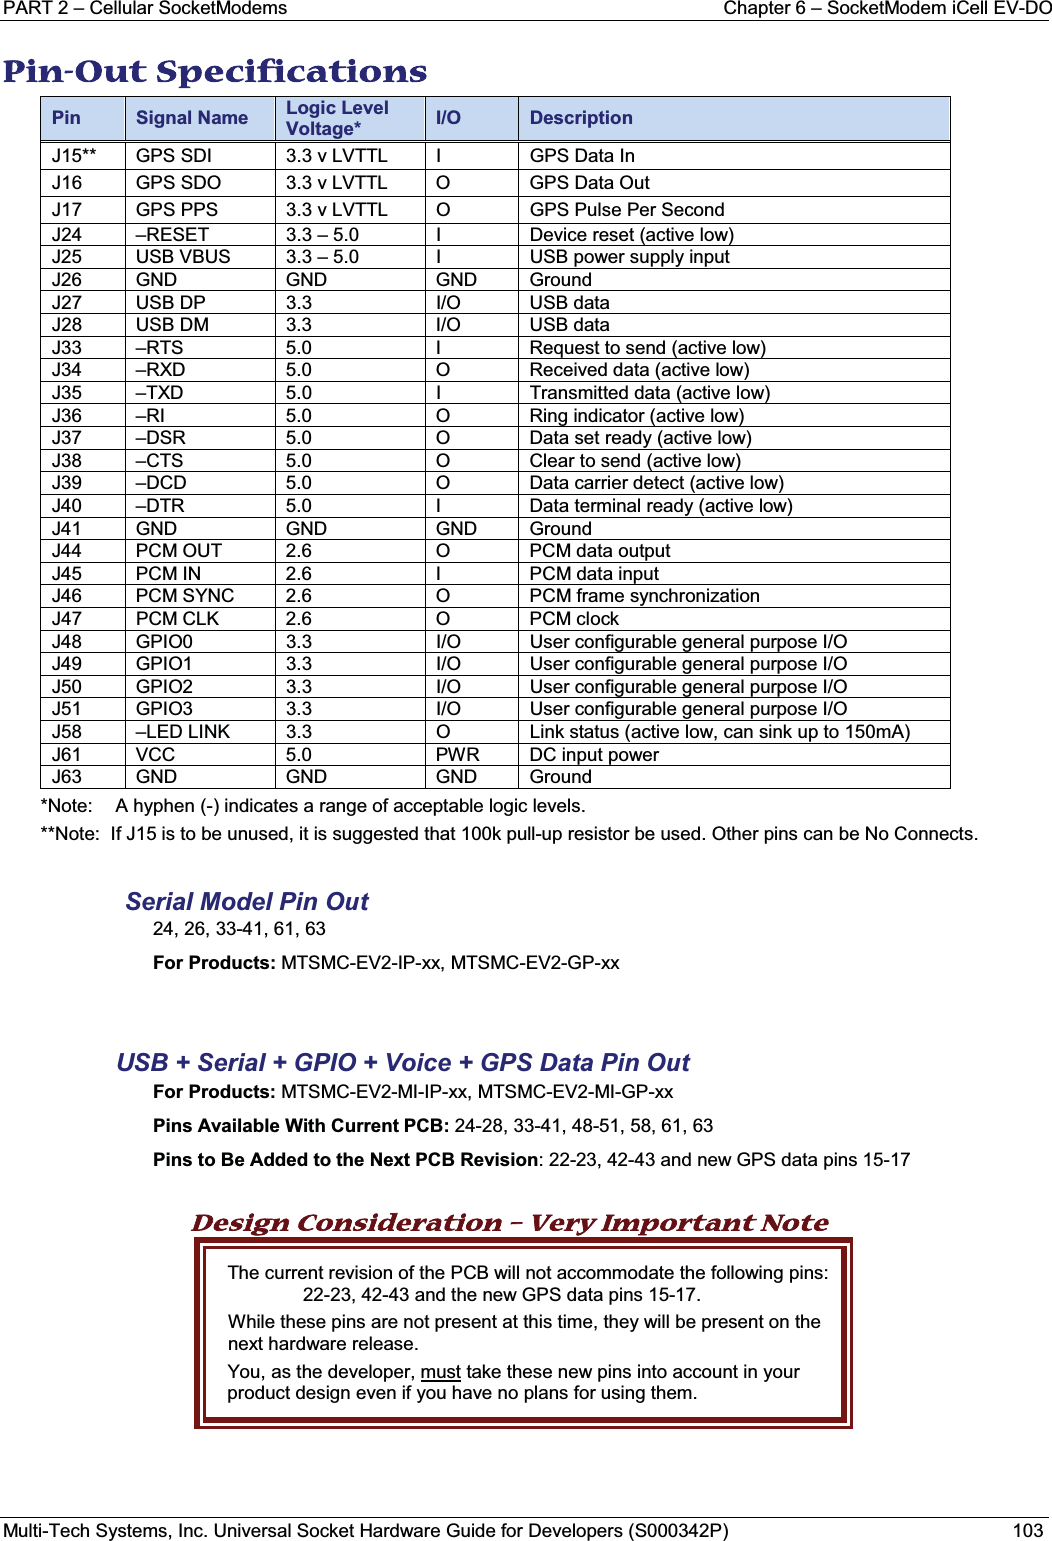 PART 2 – Cellular SocketModems Chapter 6 – SocketModem iCell EV-DOMulti-Tech Systems, Inc. Universal Socket Hardware Guide for Developers (S000342P) 103PPin-Out Specifications  Pin Signal Name Logic Level Voltage* I/O DescriptionJ15** GPS SDI 3.3 v LVTTL I GPS Data InJ16 GPS SDO 3.3 v LVTTL O GPS Data OutJ17 GPS PPS 3.3 v LVTTL O GPS Pulse Per SecondJ24 –RESET 3.3 – 5.0 I Device reset (active low)J25 USB VBUS 3.3 – 5.0 I USB power supply inputJ26 GND GND GND GroundJ27 USB DP 3.3 I/O USB dataJ28 USB DM 3.3 I/O USB dataJ33 –RTS 5.0 I Request to send (active low)J34 –RXD 5.0 O Received data (active low)J35 –TXD 5.0 I Transmitted data (active low)J36 –RI 5.0 O Ring indicator (active low)J37 –DSR 5.0 O Data set ready (active low)J38 –CTS 5.0 O Clear to send (active low)J39 –DCD 5.0 O Data carrier detect (active low)J40 –DTR 5.0 I Data terminal ready (active low)J41 GND GND GND GroundJ44 PCM OUT 2.6 O PCM data outputJ45 PCM IN 2.6 I PCM data inputJ46 PCM SYNC 2.6 O PCM frame synchronizationJ47 PCM CLK 2.6 O PCM clockJ48 GPIO0 3.3 I/O User configurable general purpose I/OJ49 GPIO1 3.3 I/O User configurable general purpose I/OJ50 GPIO2 3.3 I/O User configurable general purpose I/OJ51 GPIO3 3.3 I/O User configurable general purpose I/OJ58 –LED LINK 3.3 O Link status (active low, can sink up to 150mA)J61 VCC 5.0 PWR DC input powerJ63 GND GND GND Ground*Note: A hyphen (-) indicates a range of acceptable logic levels.**Note:  If J15 is to be unused, it is suggested that 100k pull-up resistor be used. Other pins can be No Connects.Serial Model Pin Out24, 26, 33-41, 61, 63For Products: MTSMC-EV2-IP-xx, MTSMC-EV2-GP-xxUSB + Serial + GPIO + Voice + GPS Data Pin OutFor Products: MTSMC-EV2-MI-IP-xx, MTSMC-EV2-MI-GP-xxPins Available With Current PCB: 24-28, 33-41, 48-51, 58, 61, 63Pins to Be Added to the Next PCB Revision: 22-23, 42-43 and new GPS data pins 15-17Design Consideration – Very Important Note The current revision of the PCB will not accommodate the following pins: 22-23, 42-43 and the new GPS data pins 15-17. While these pins are not present at this time, they will be present on the next hardware release. You, as the developer, must take these new pins into account in your product design even if you have no plans for using them.